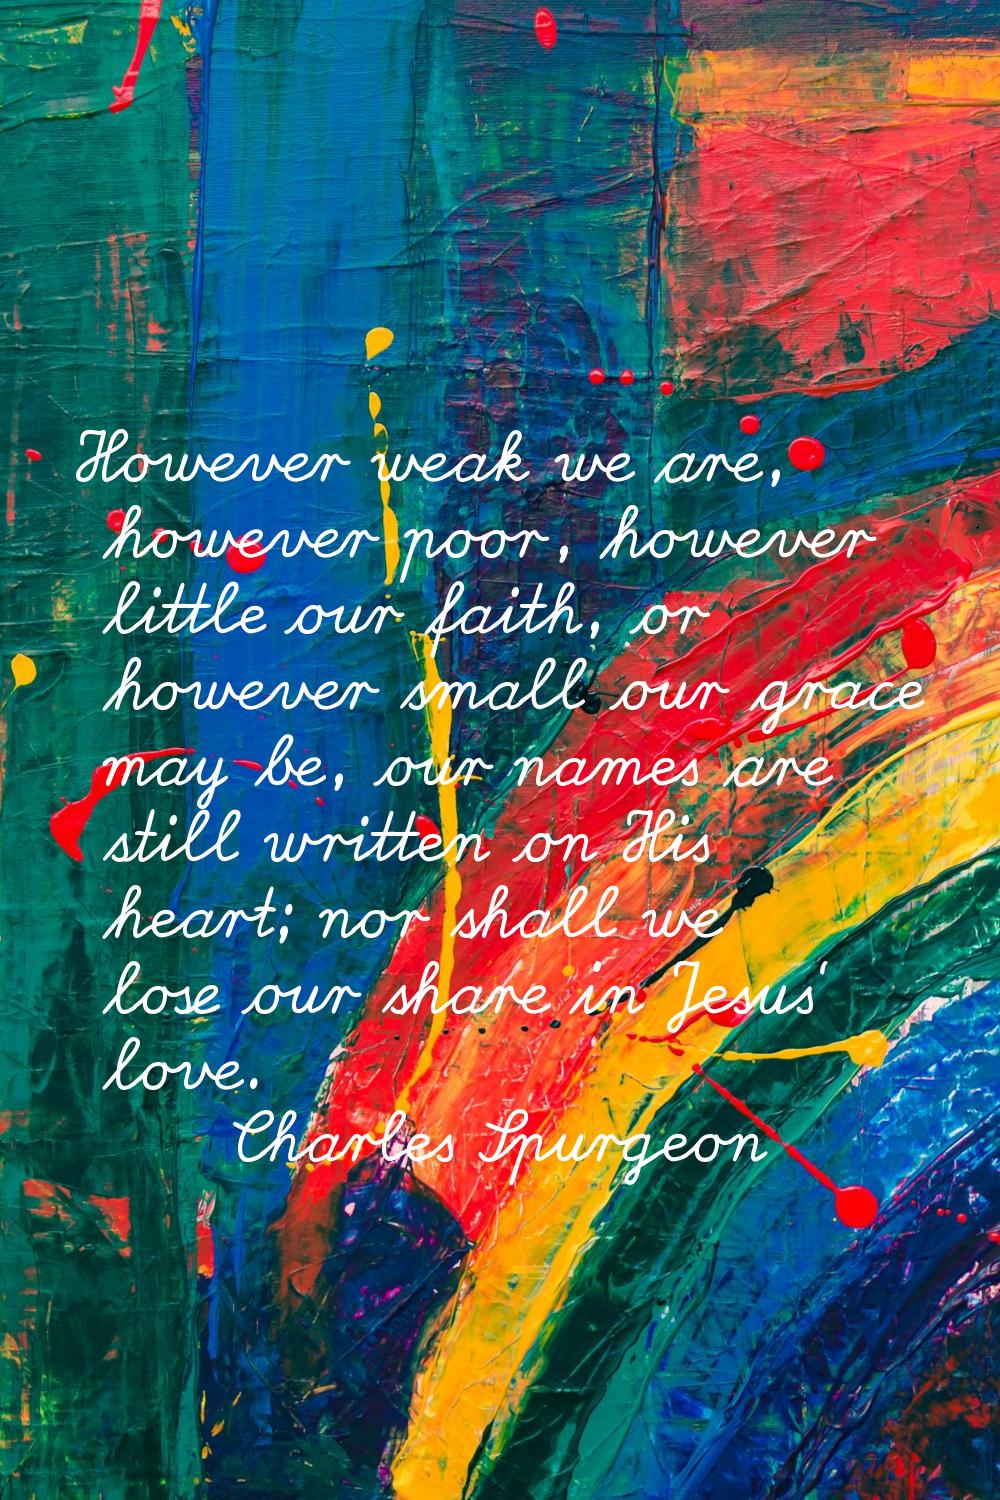 However weak we are, however poor, however little our faith, or however small our grace may be, our